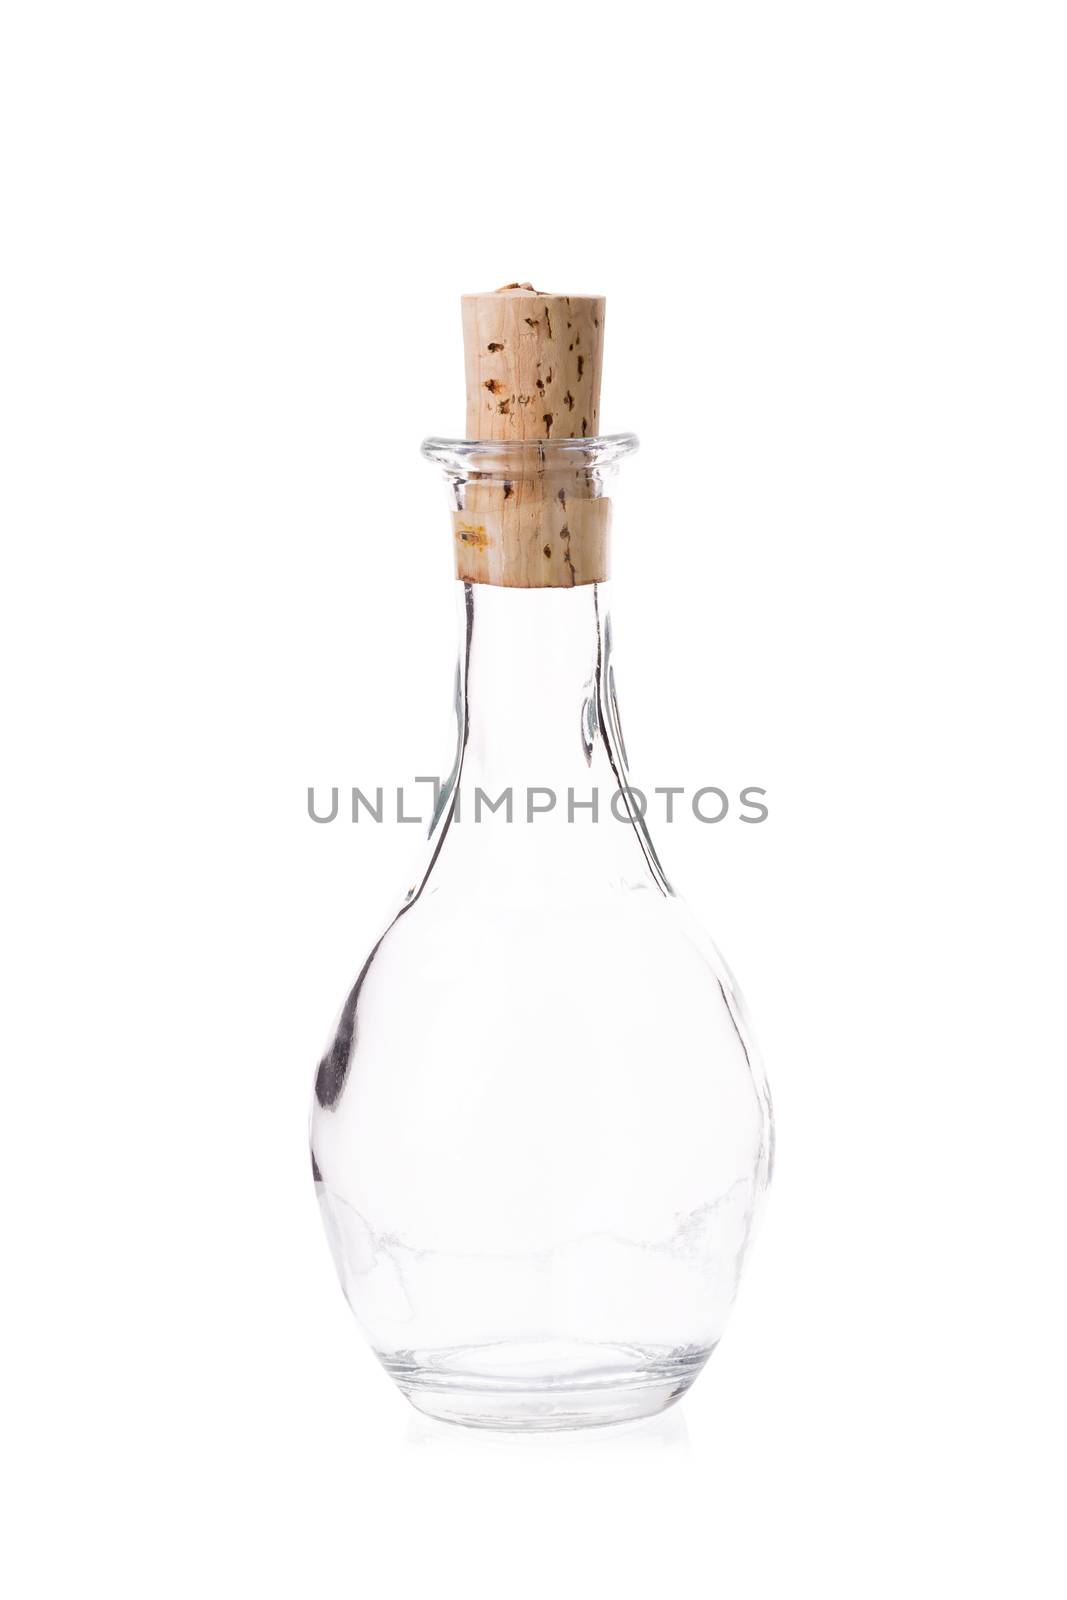 Retro wine bottle isolated on a white background by kaiskynet